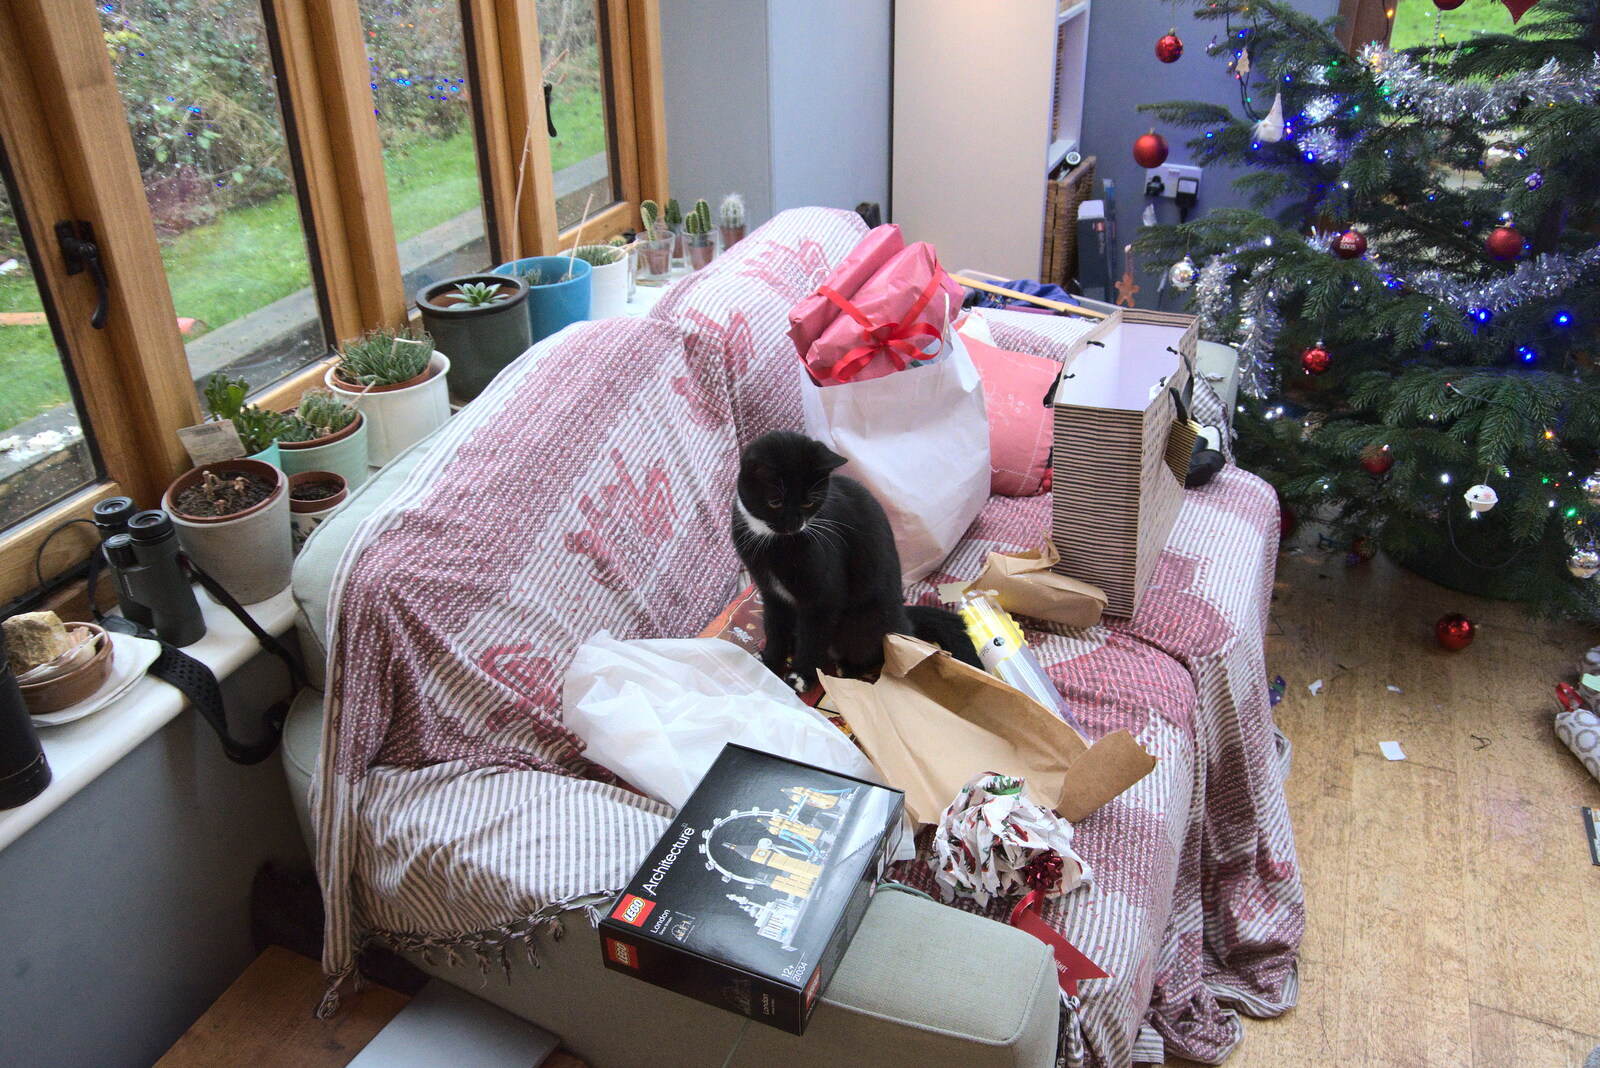 A kitten sits on wrapping paper from Christmas Day at Home, Brome, Suffolk - 25th December 2021